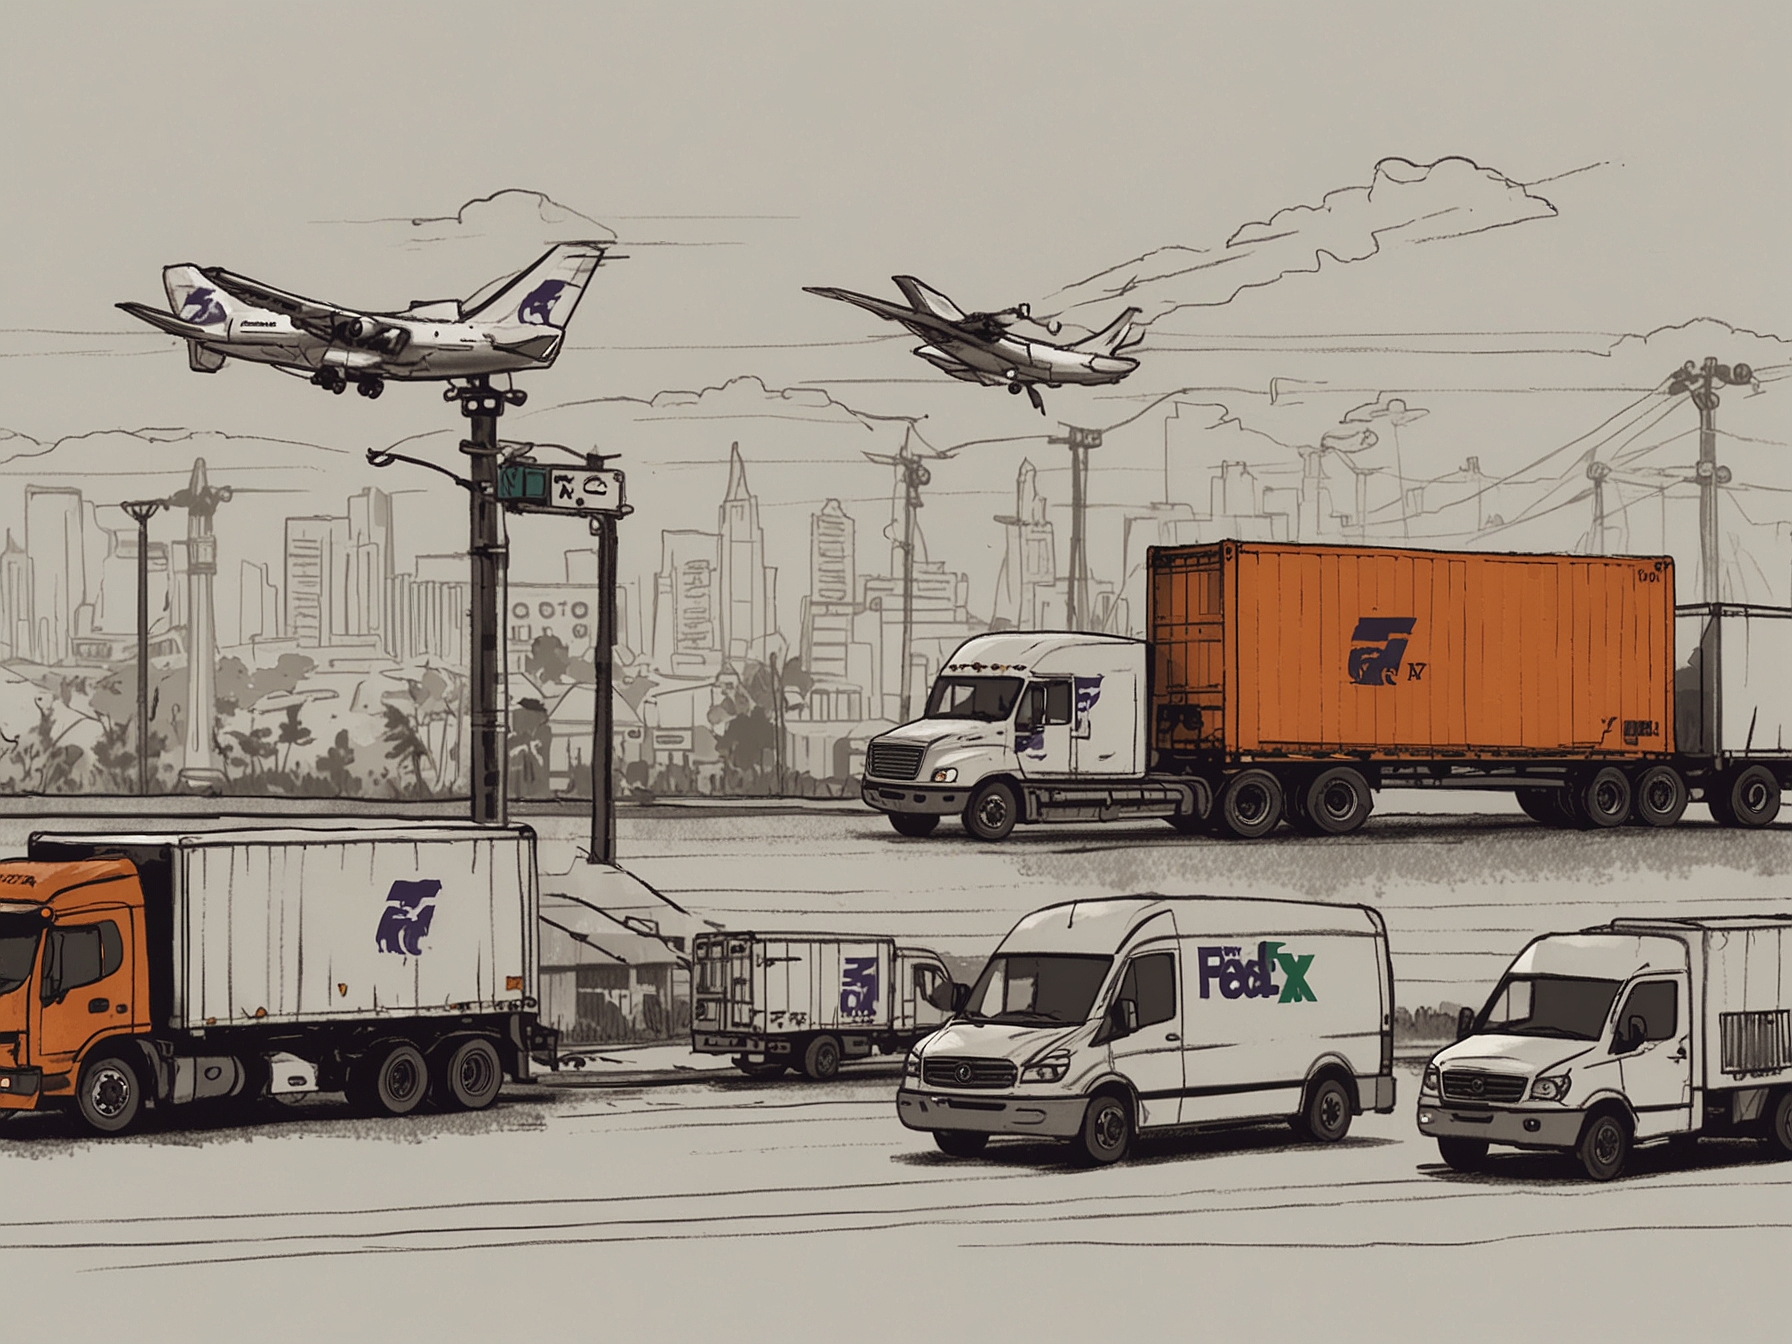 Illustration of FedEx's logistics network improvement with icons representing e-commerce, electric vehicles, and supply chain optimization, emphasizing sustainability and technological advancements.